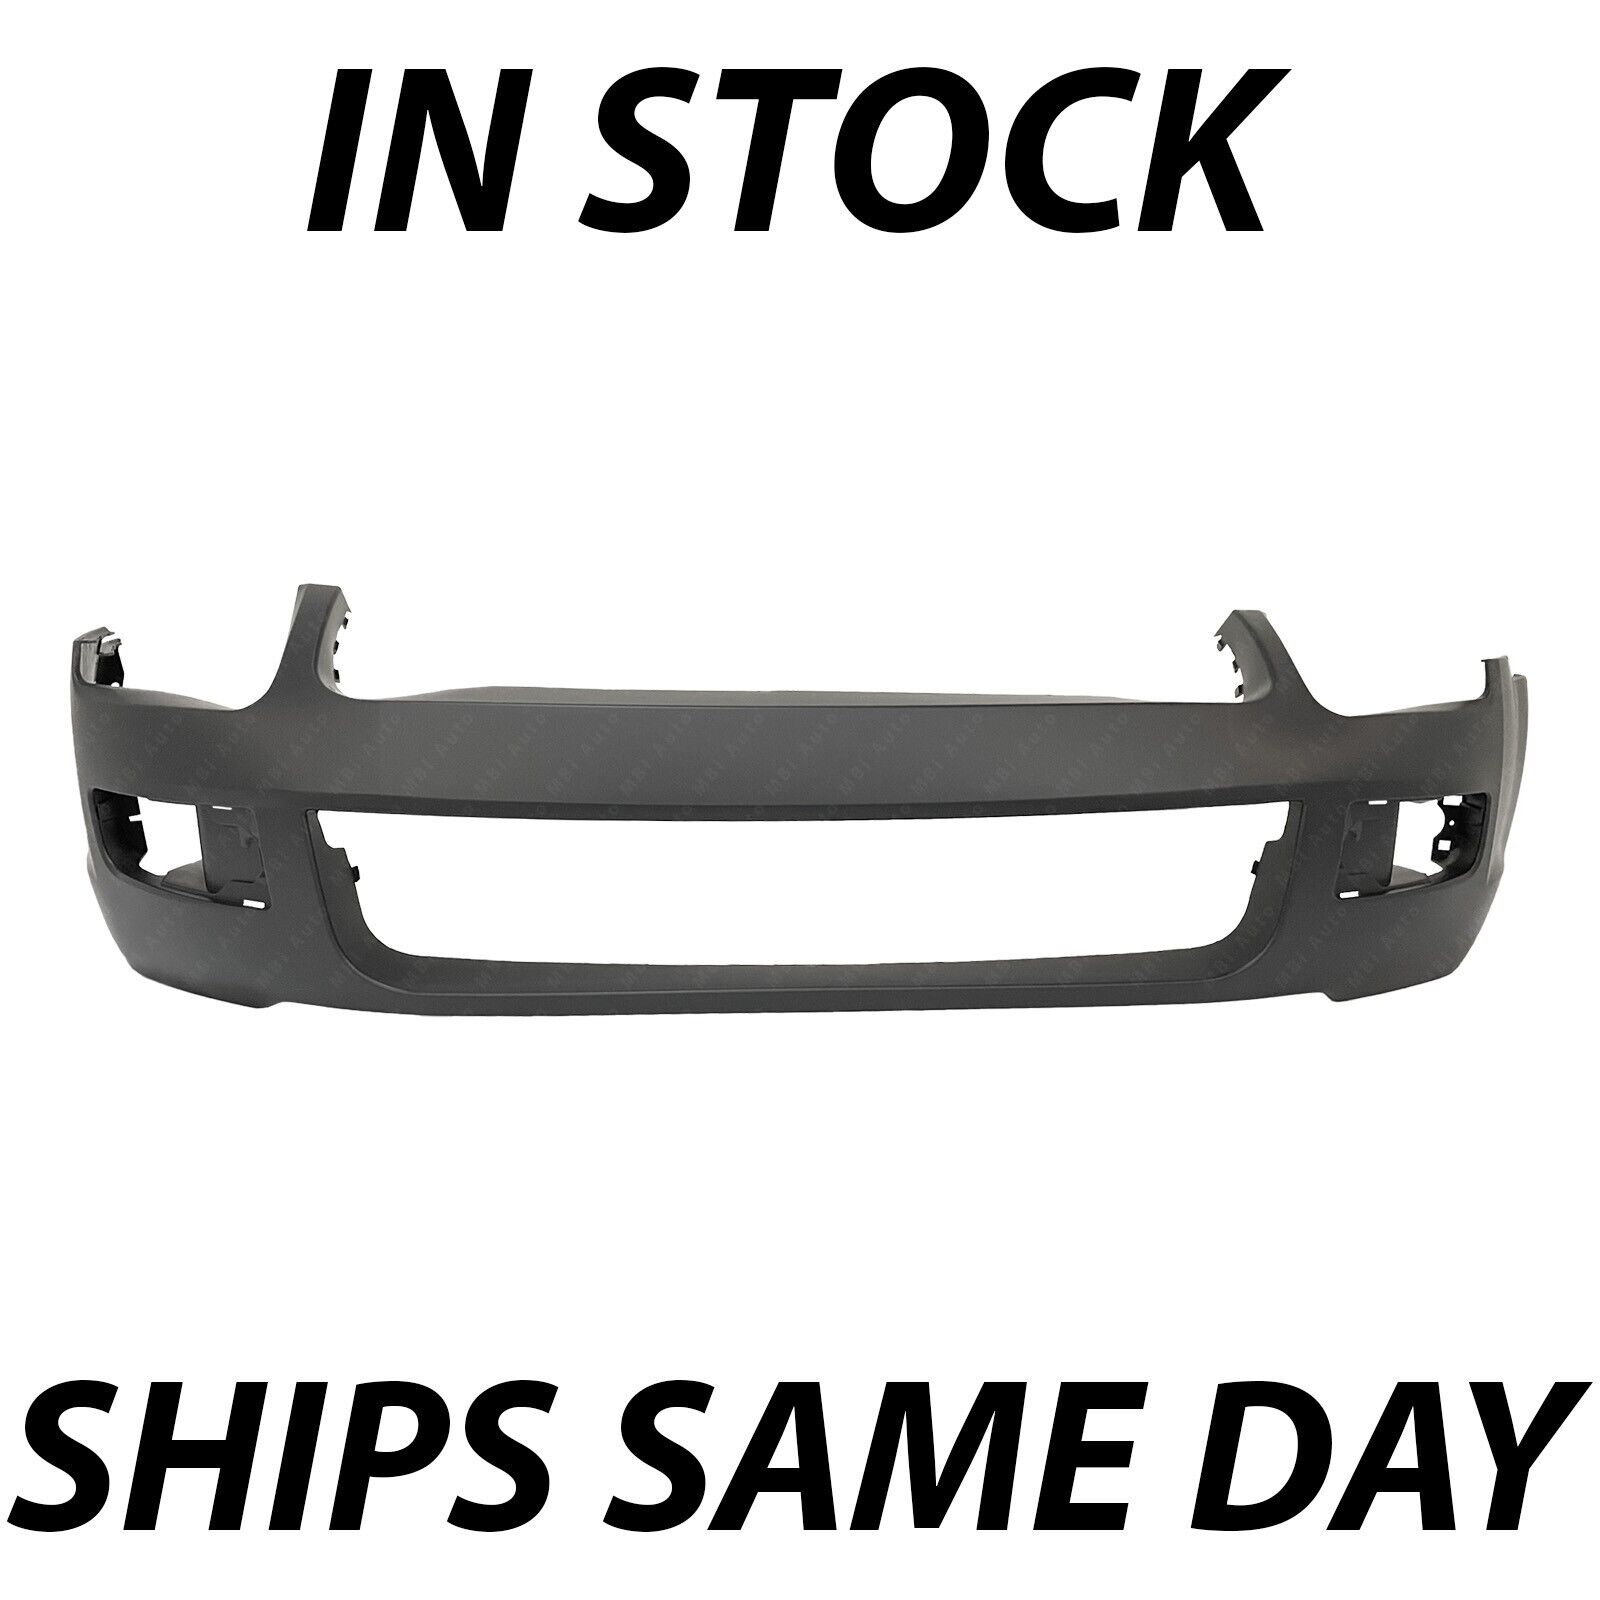 NEW Primered Front Bumper Cover Fascia for 2006 2007 2008 2009 Ford Fusion 06-09